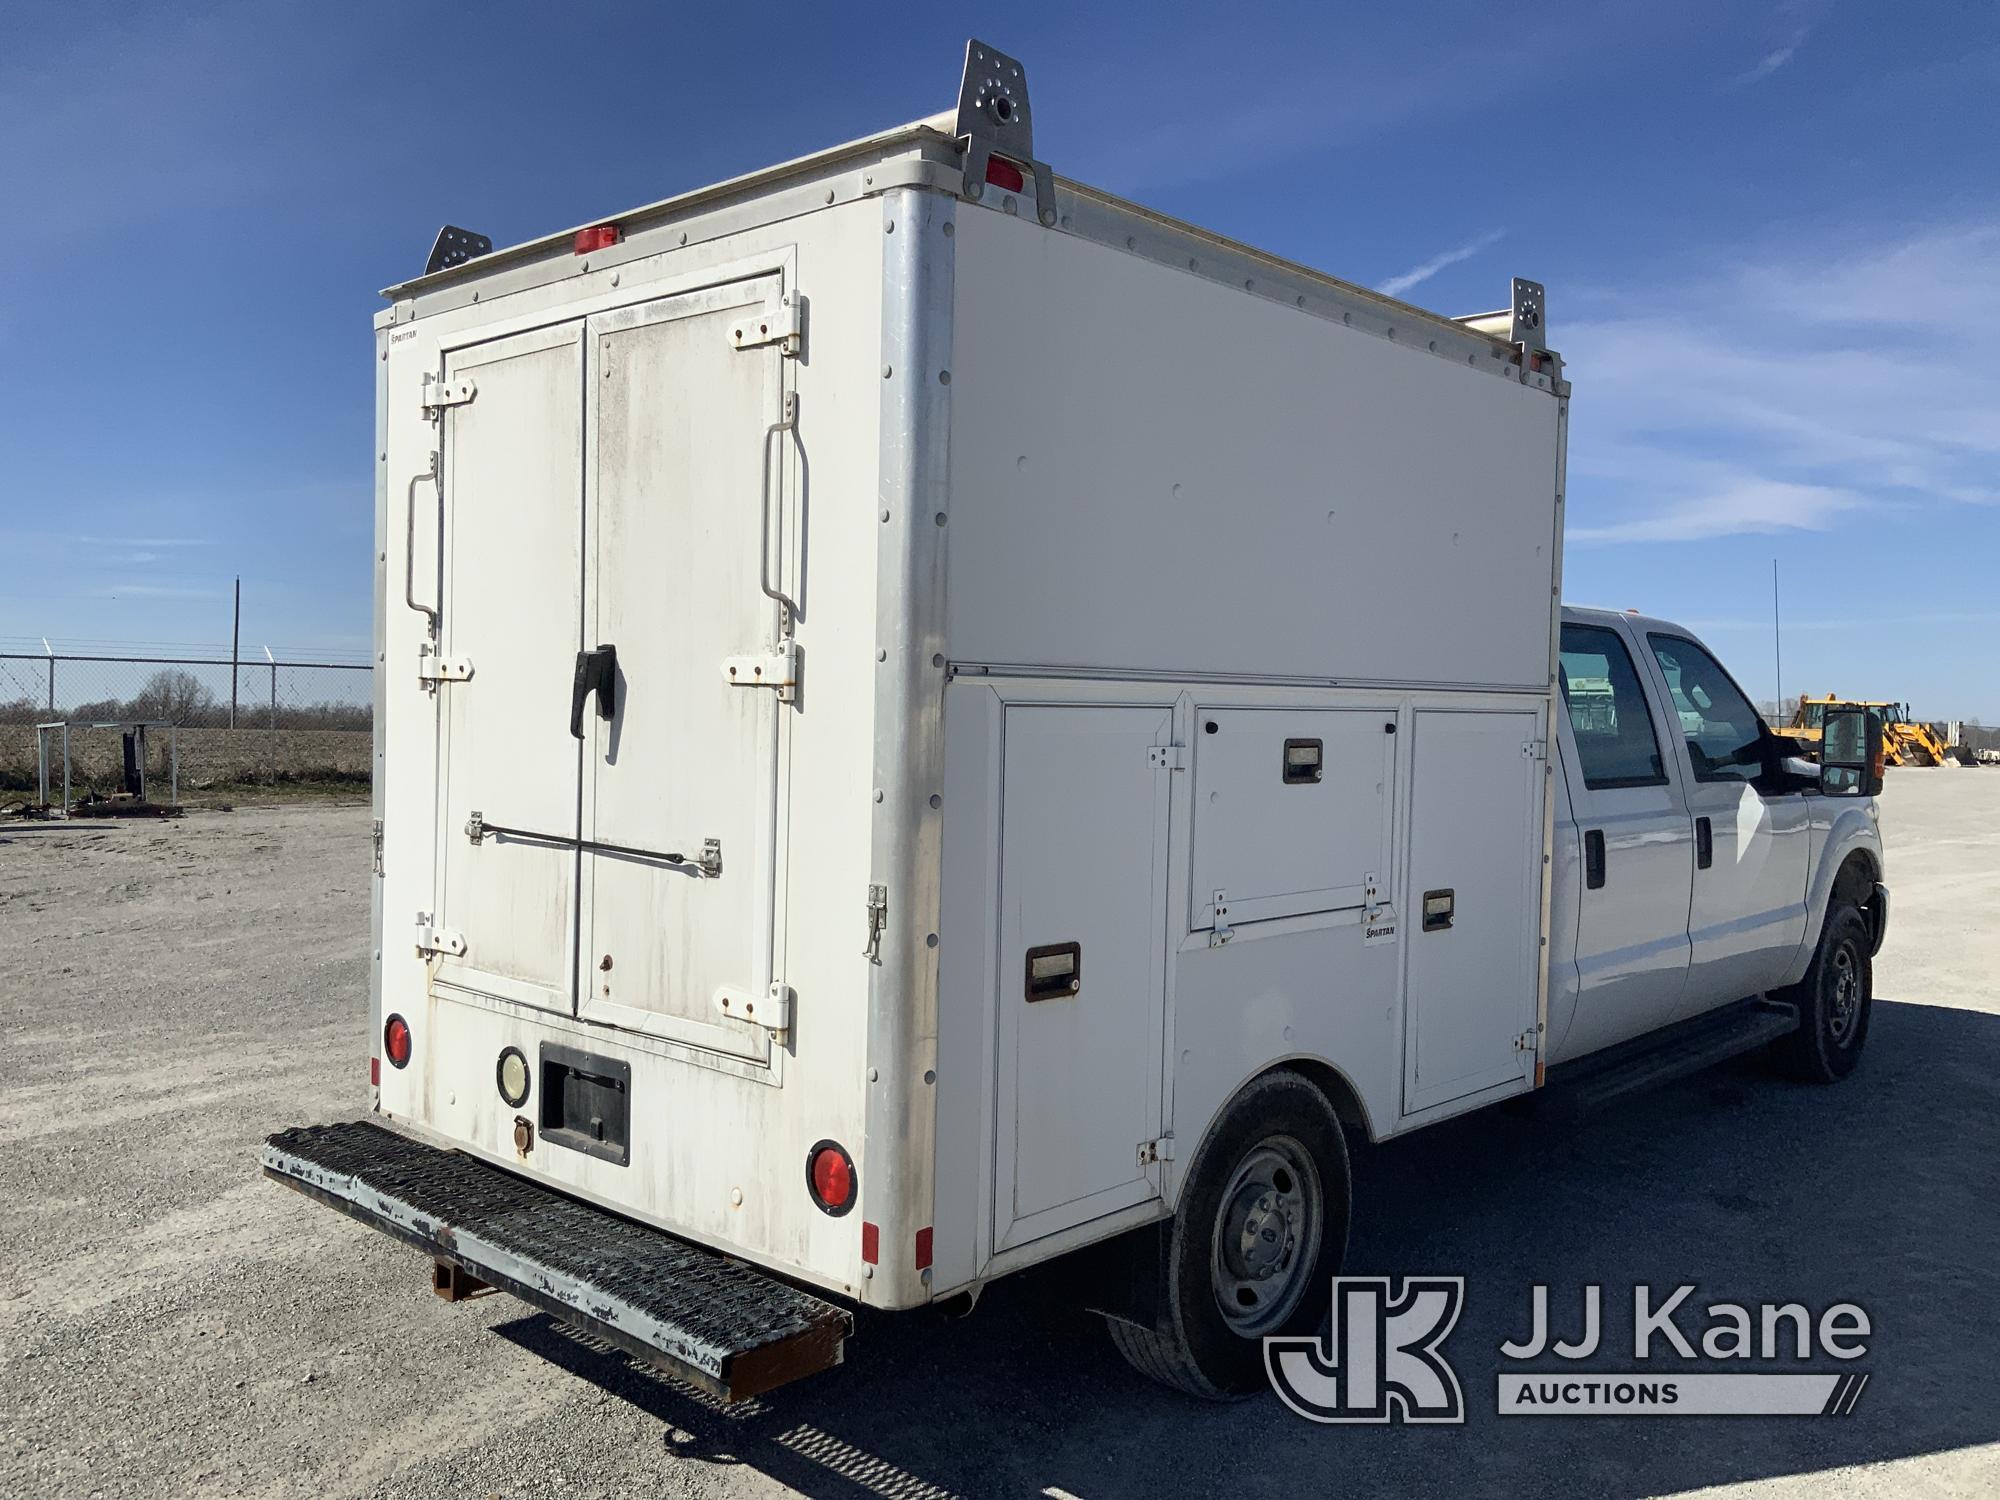 (Hawk Point, MO) 2012 Ford F250 4x4 Enclosed High-Top Service Truck Runs & Moves.